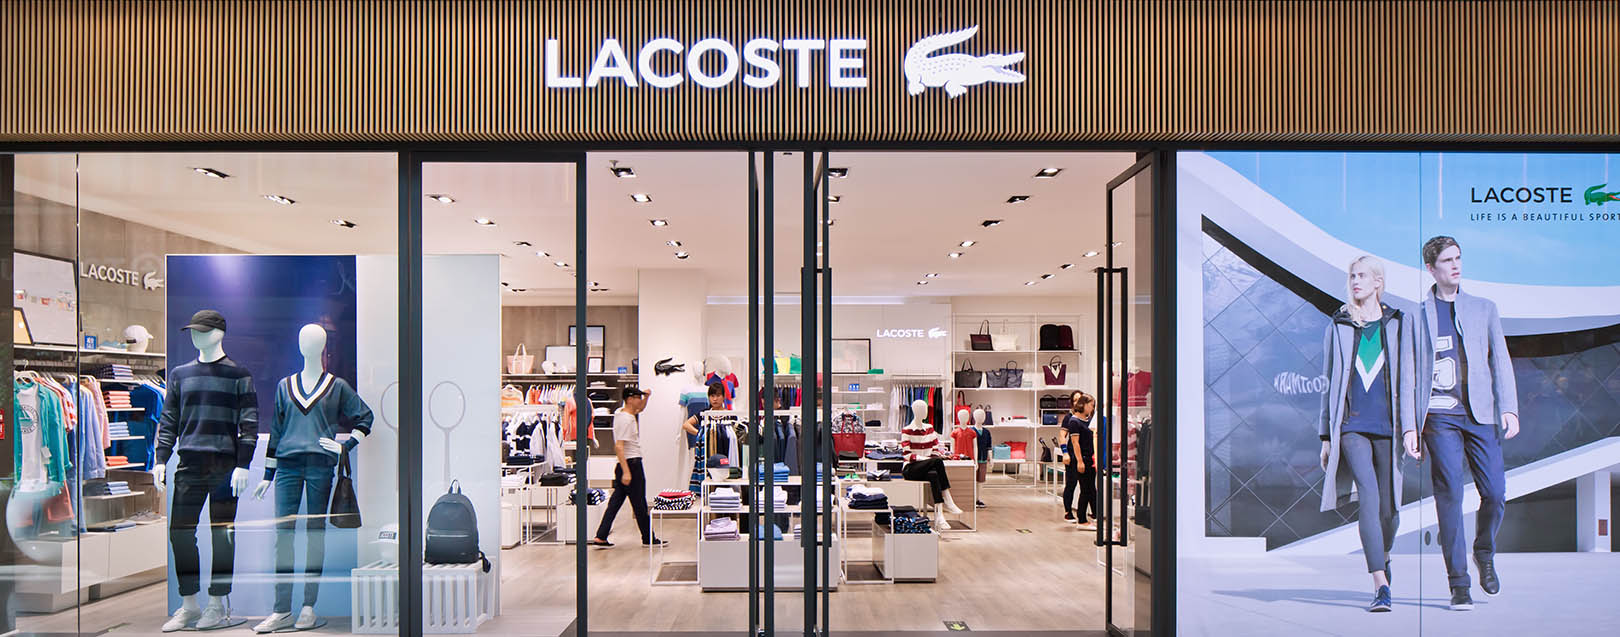 Lacoste India eyes to double turnover by 2021